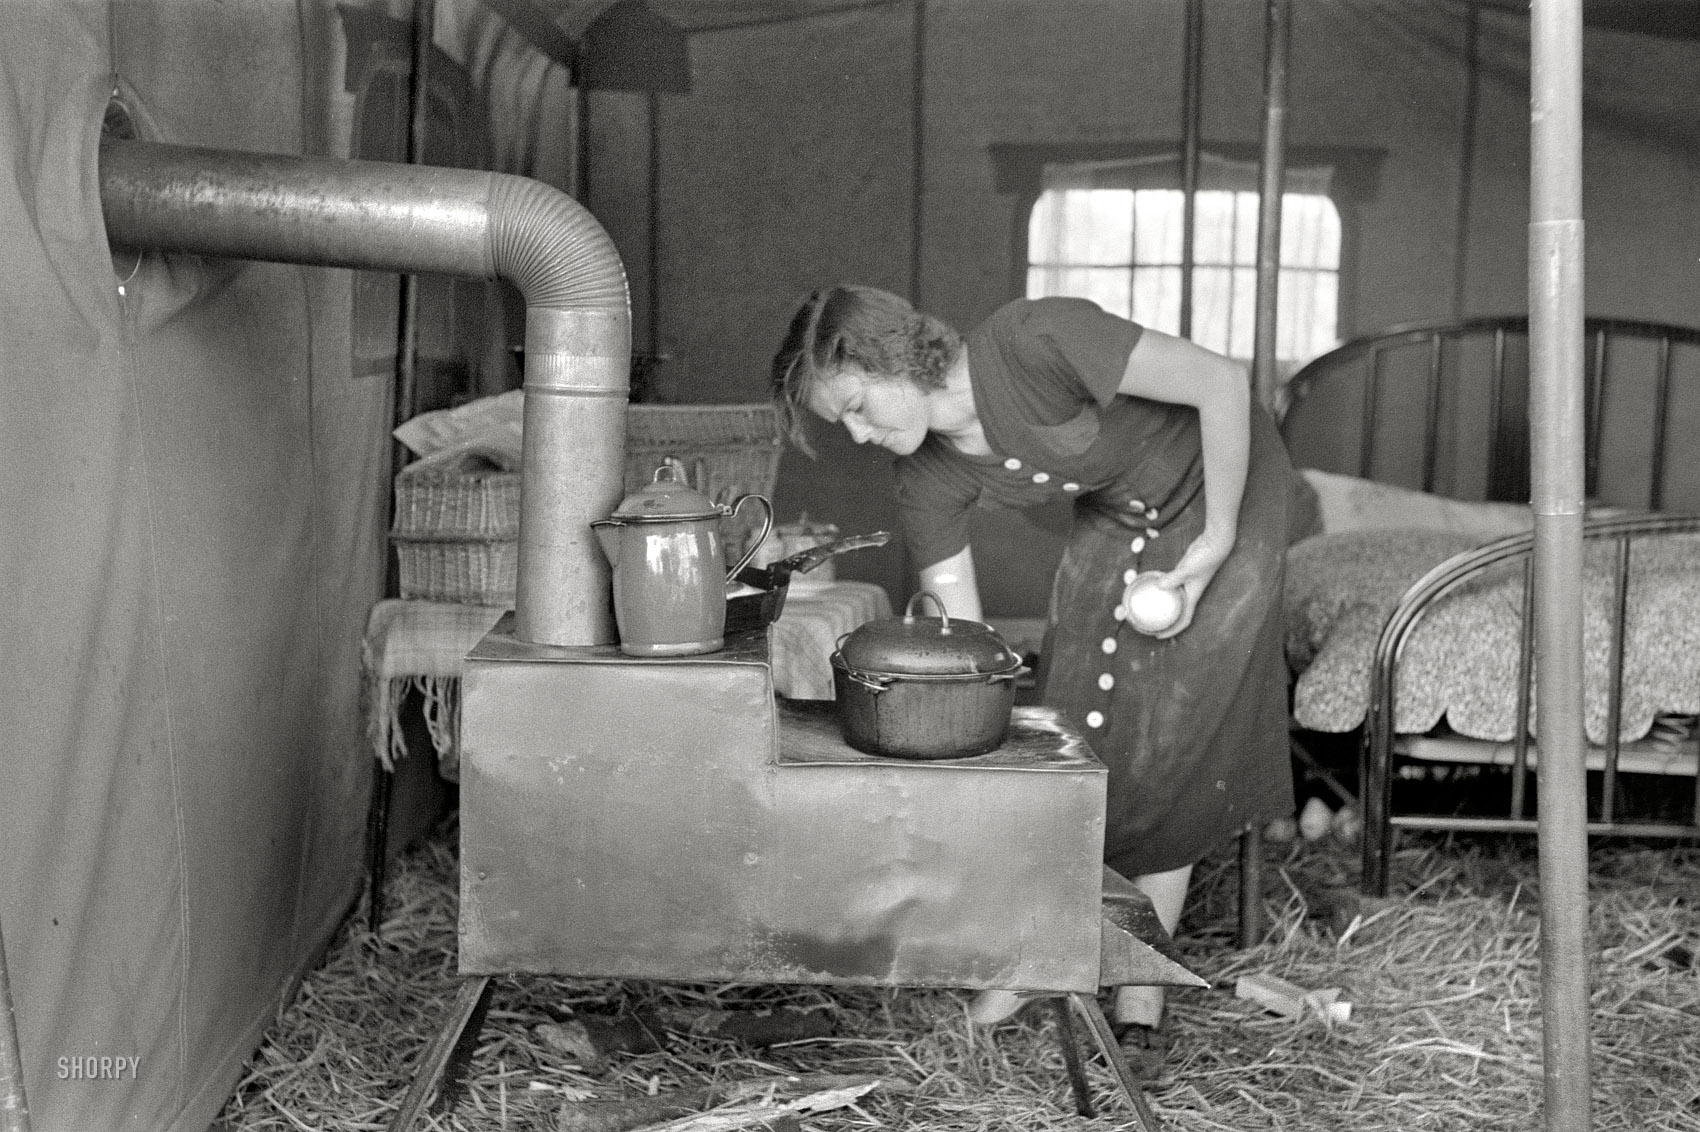 October 1938. "Tent of migrant stove maker and repairer on U.S. 90 near Jeanerette, Louisiana." Photo by Russell Lee for the FSA. View full size. 